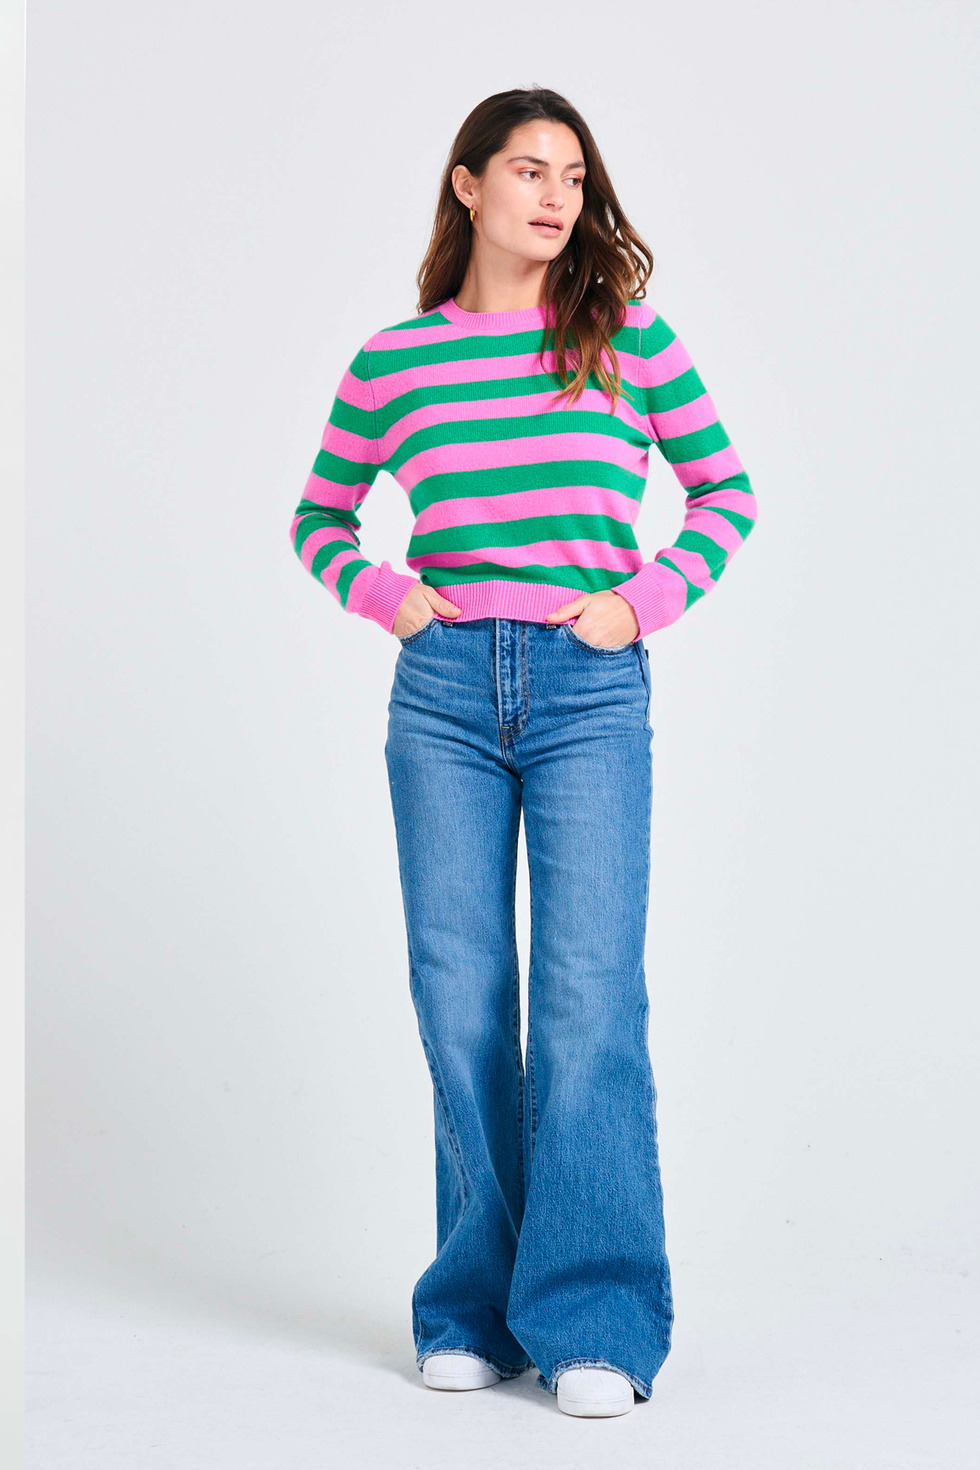 Stripe Cashmere Crew in Peony and Bright Green, £149